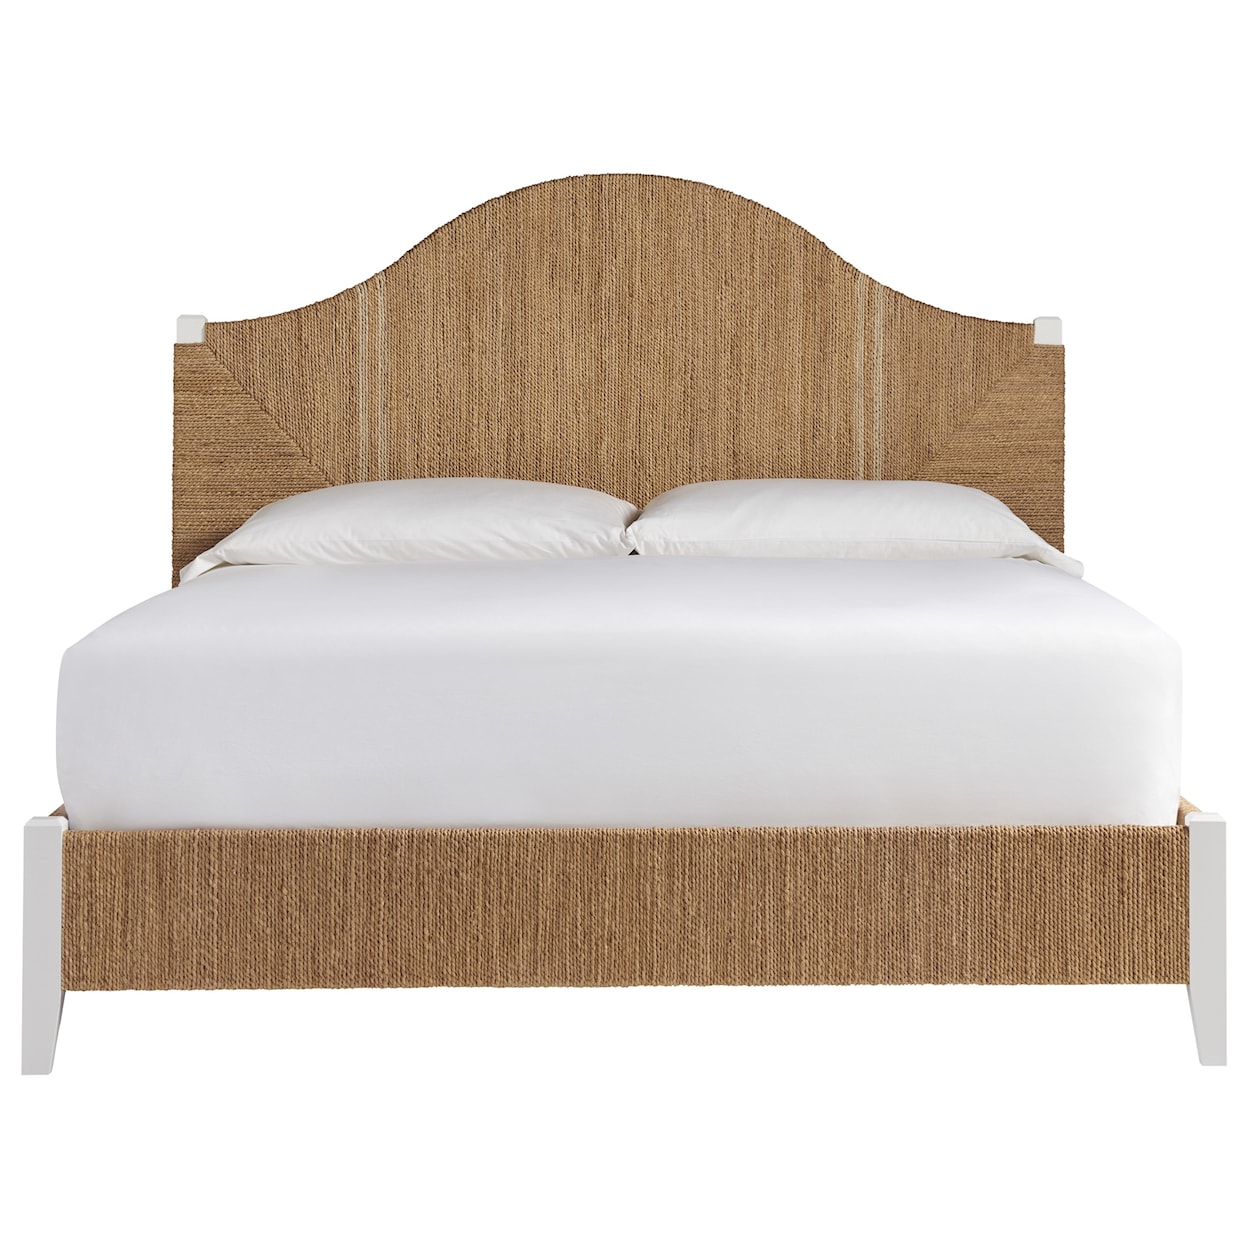 Universal Escape-Coastal Living Home Collection King Panel Bed